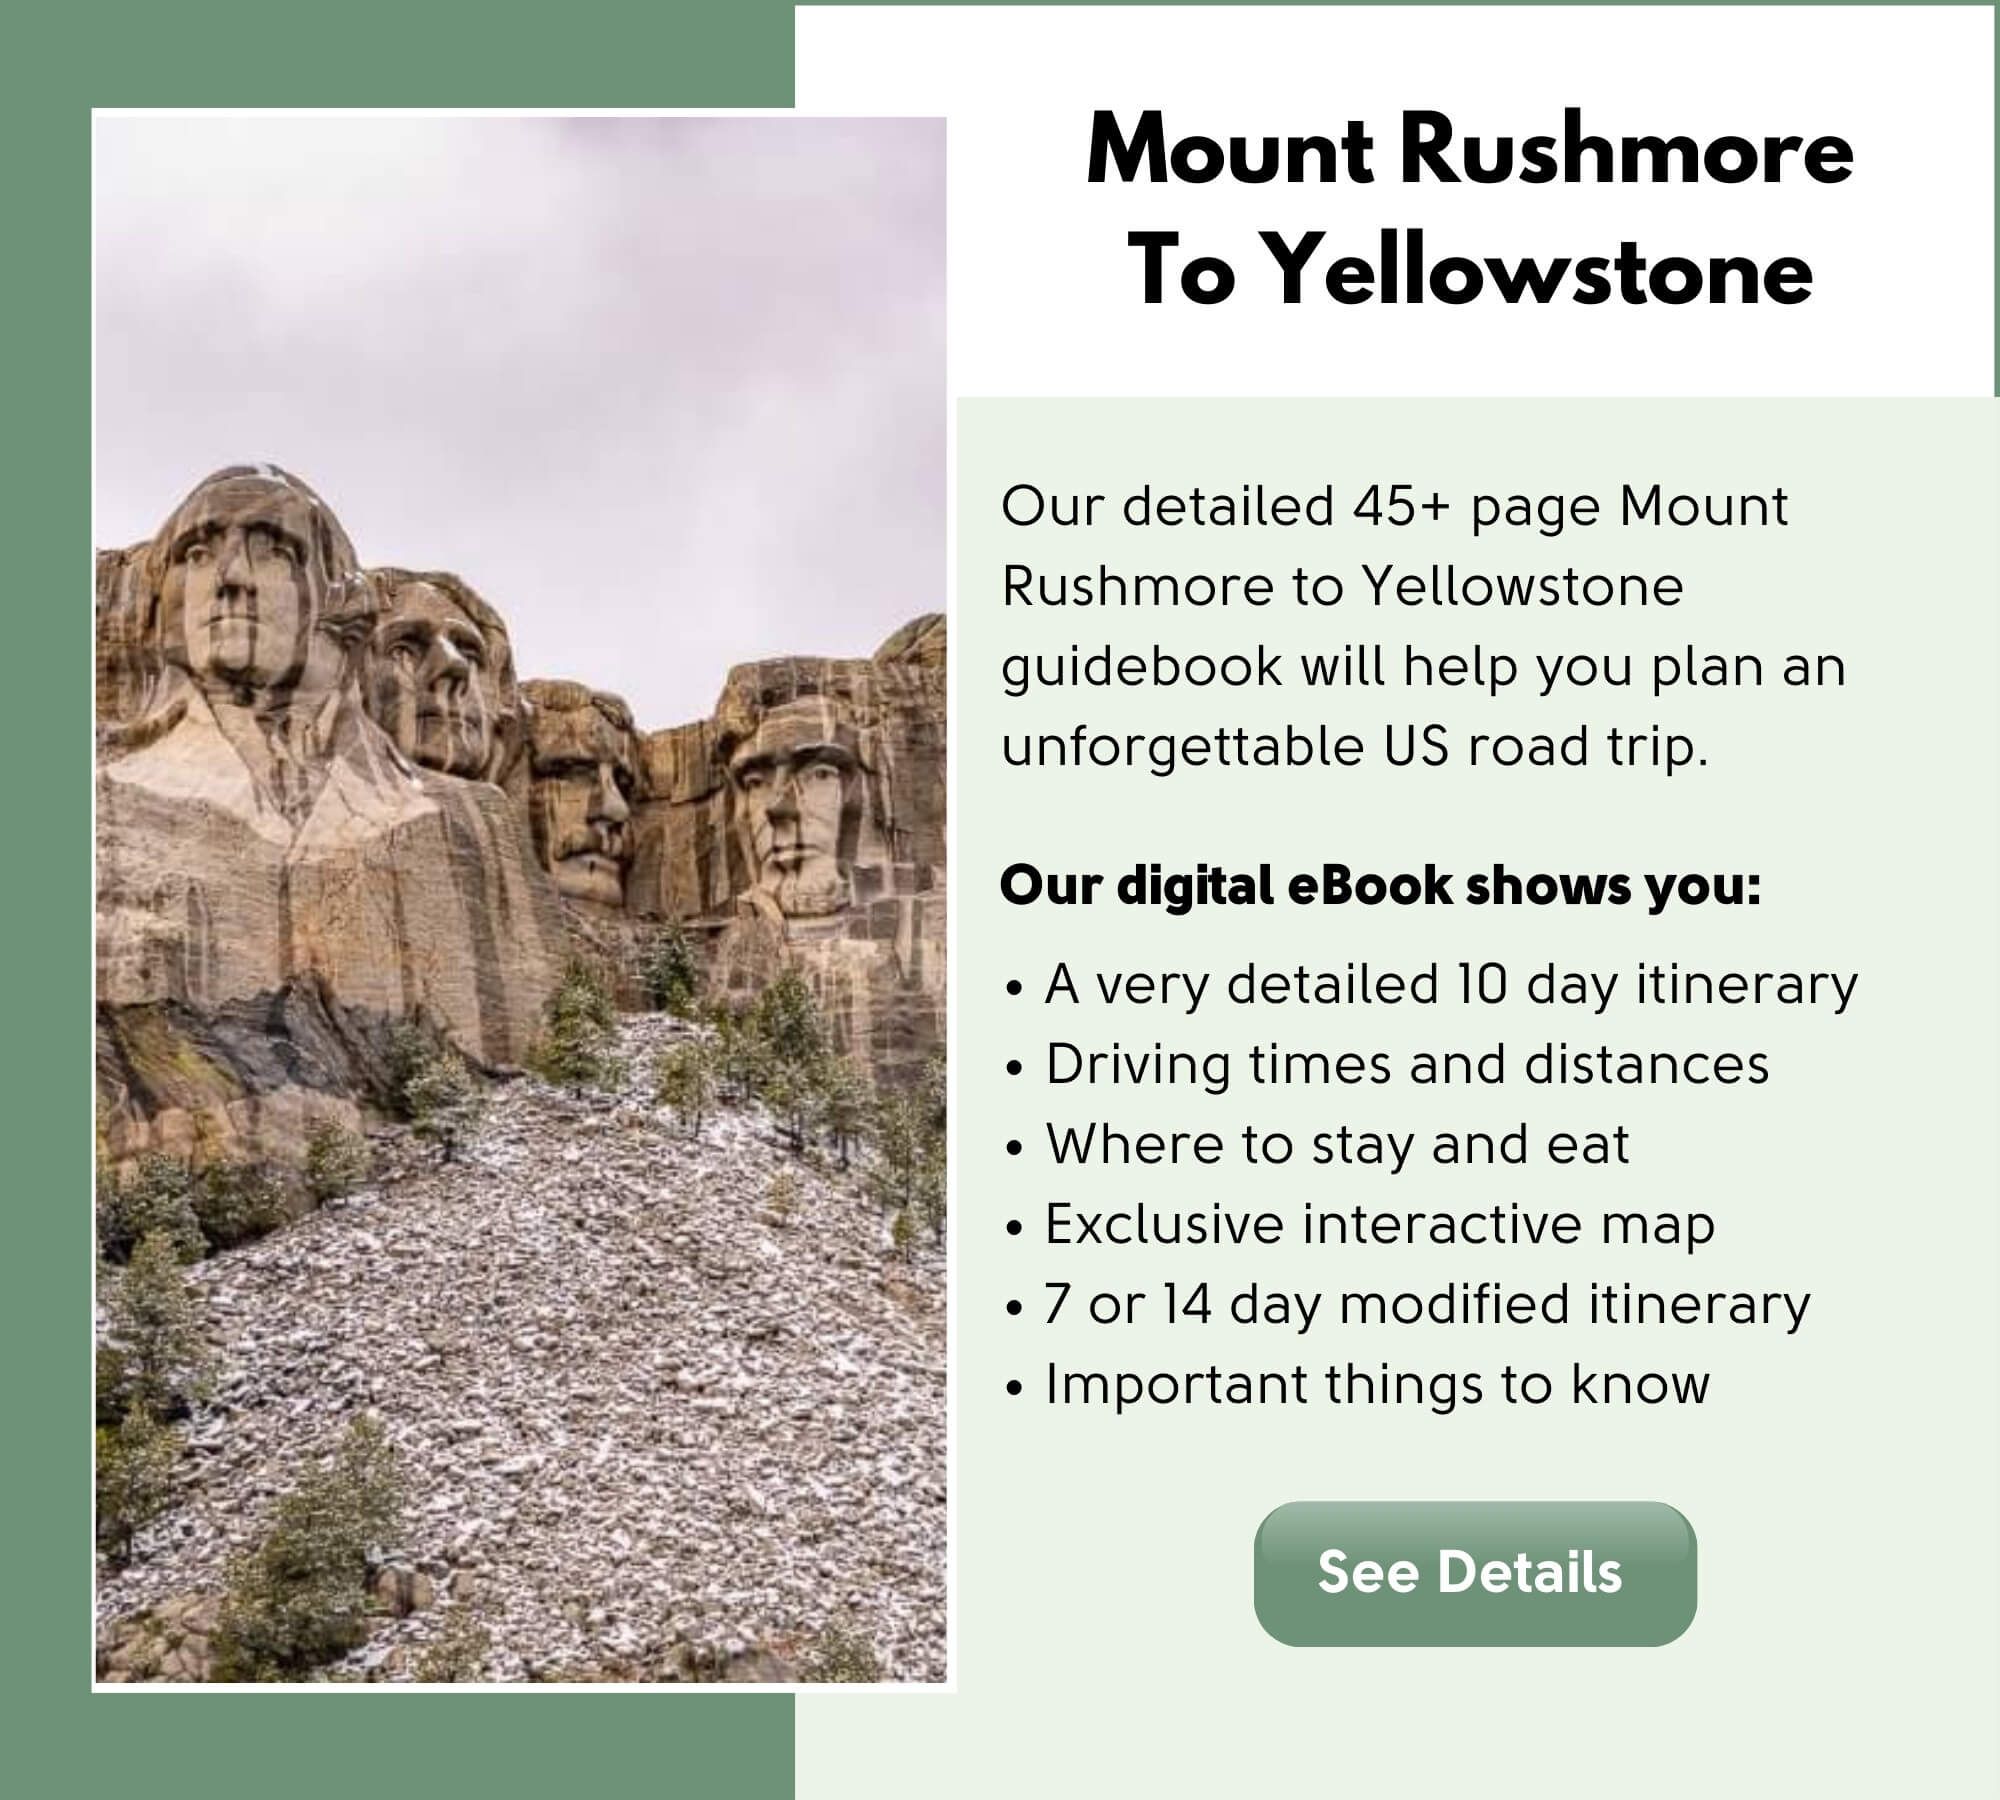 Mount Rushmore To Yellowstone Itinerary by Where Are Those Morgans